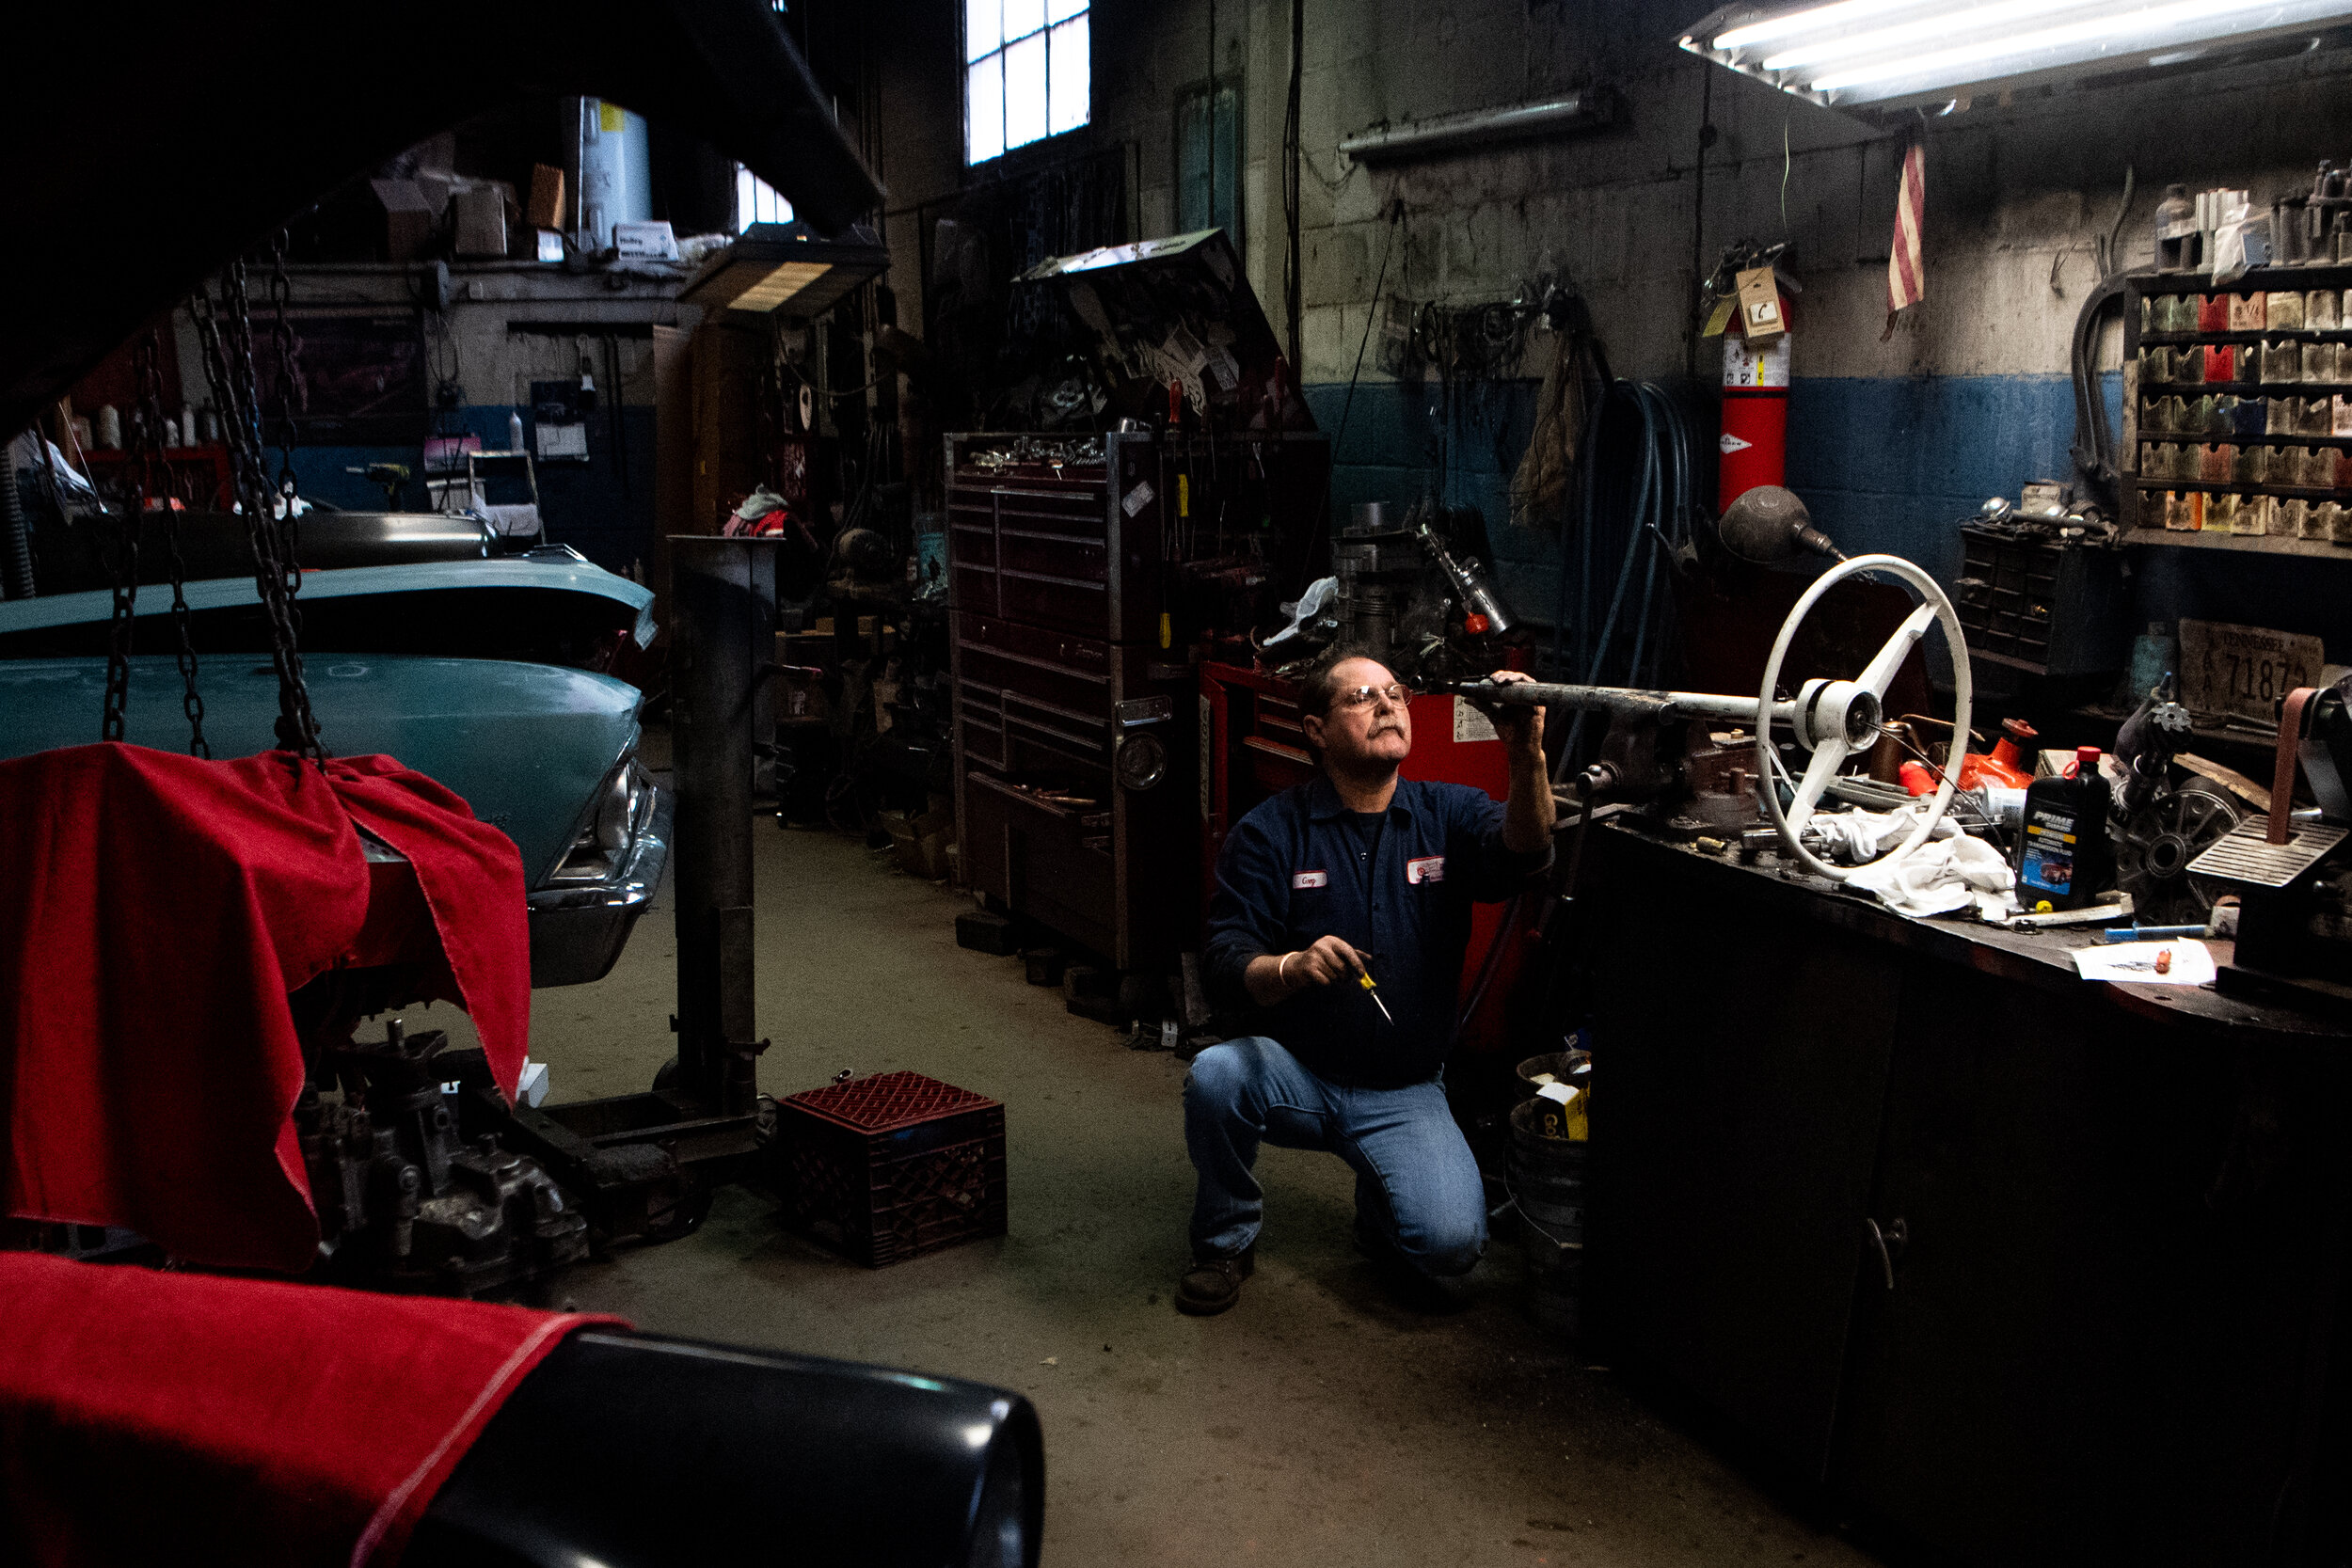  Greg Griggs repairs a steering wheel at Greg's Auto Repair on Feb. 28, 2020 in Nashville. Greg has owed the shop for over 30 years and worked at the shop before buying it. Griggs has seen East Nashville transform around him from a place with drug de